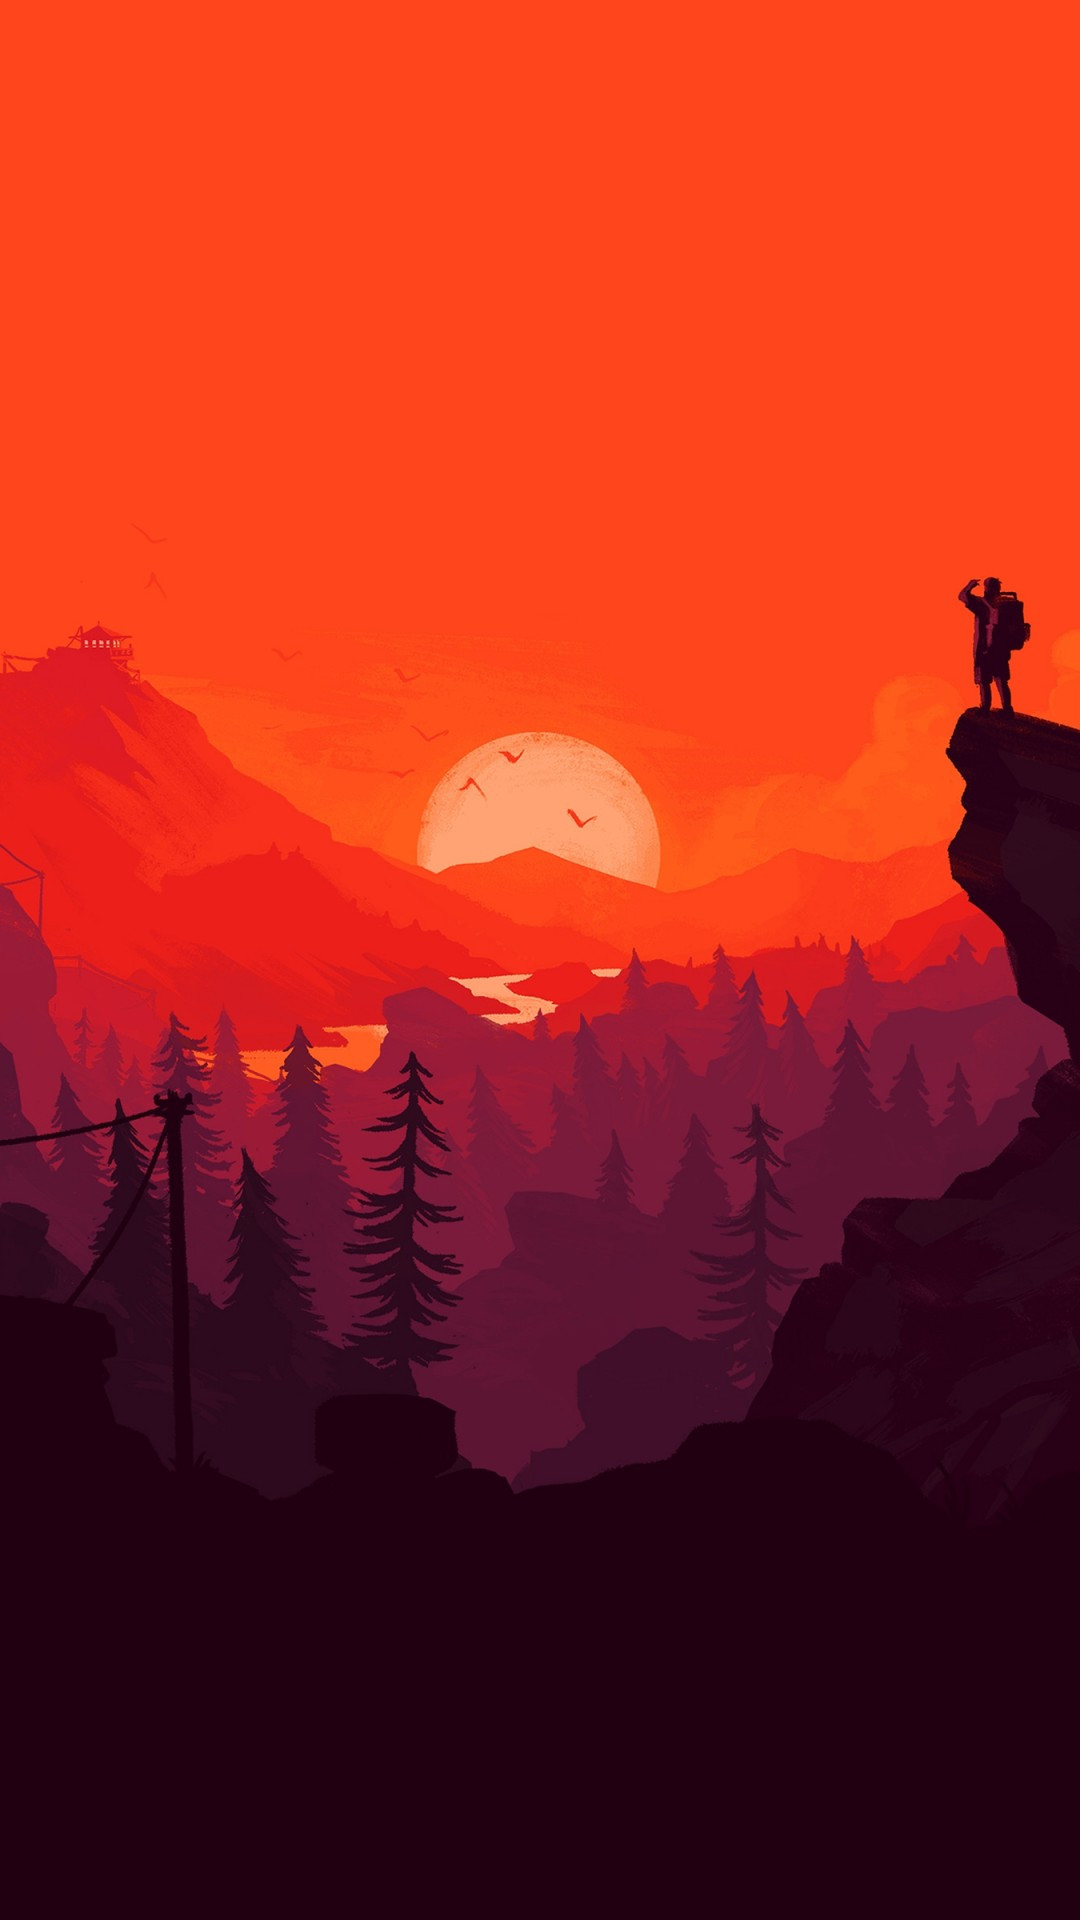 Download 1080x1920 Flat Landscape, Illustration, Sunset, Cliff, Man Hiking, Red Sky, Digital Art Wallpaper for iPhone iPhone 7 Plus, iPhone 6+, Sony Xperia Z, HTC One